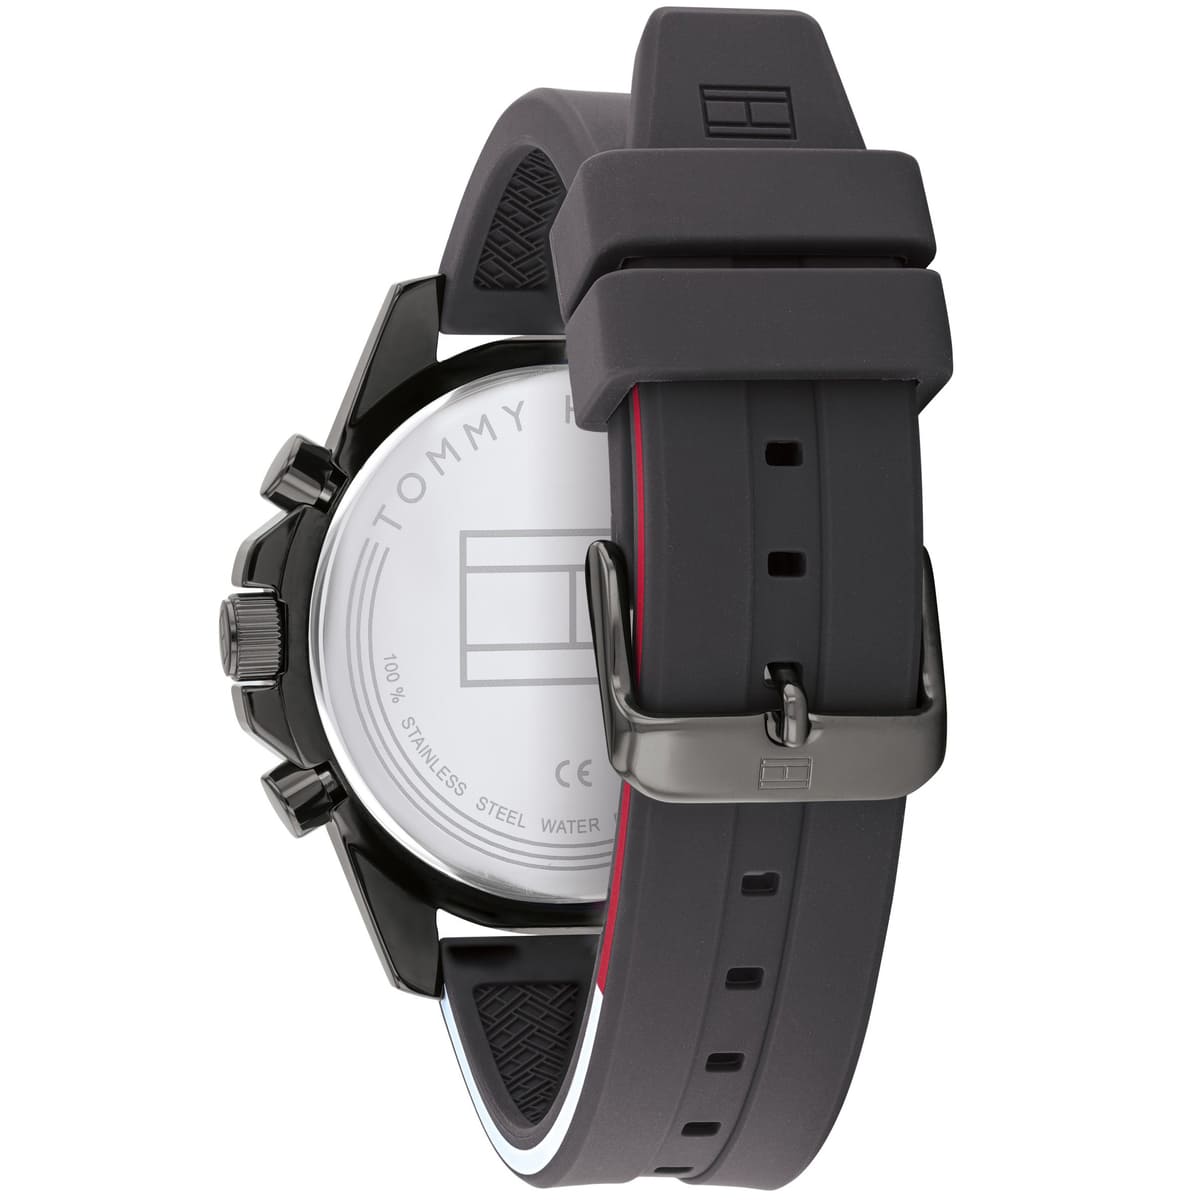 Tommy Hilfiger men's watch with Black silicone strap